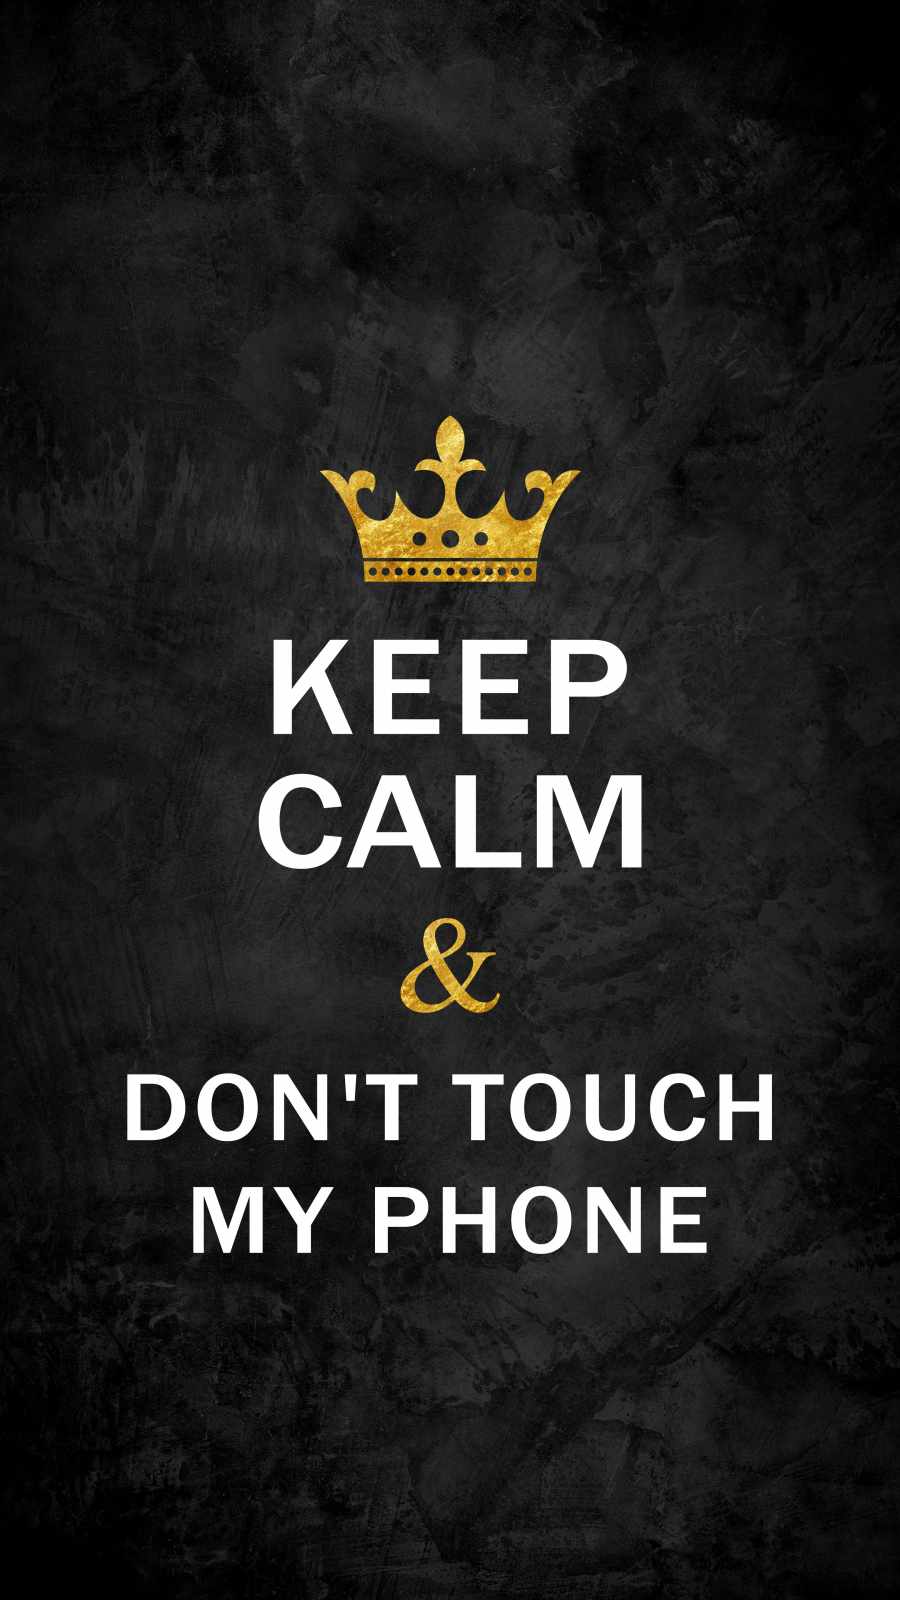 Keep calm and dont touch my phone iphone wallpaper